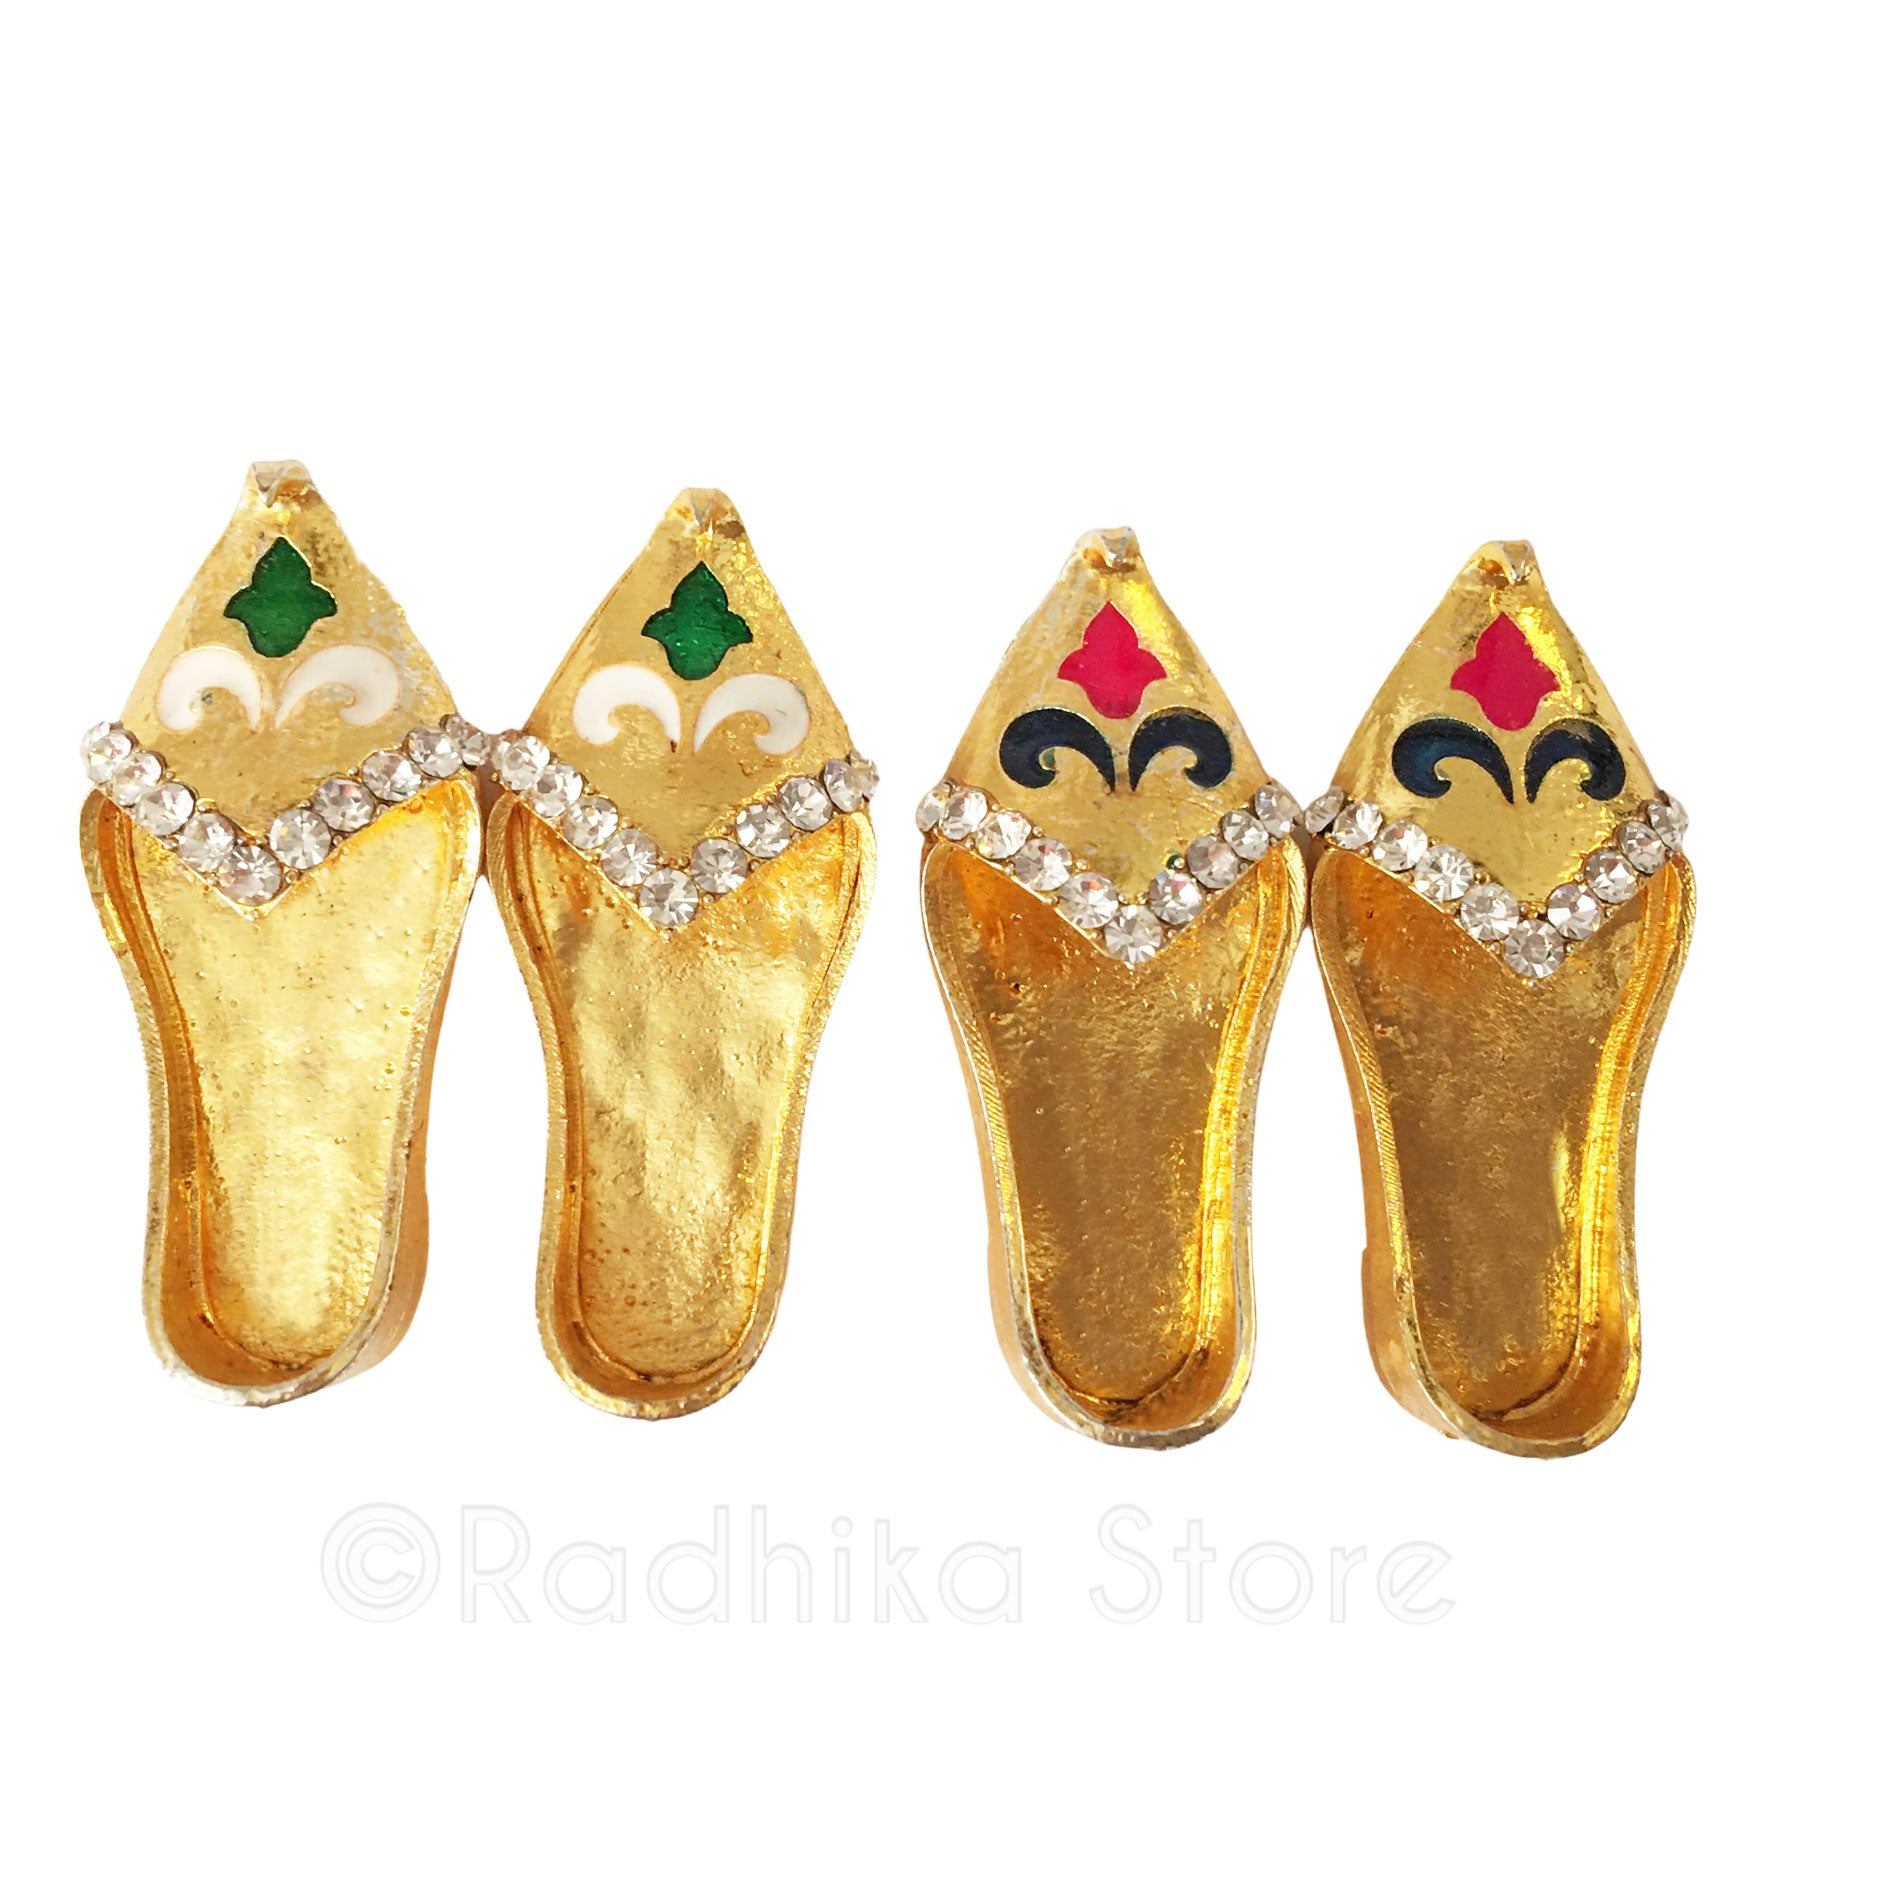 Golden Deity Slippers - Shoes - Green or Red